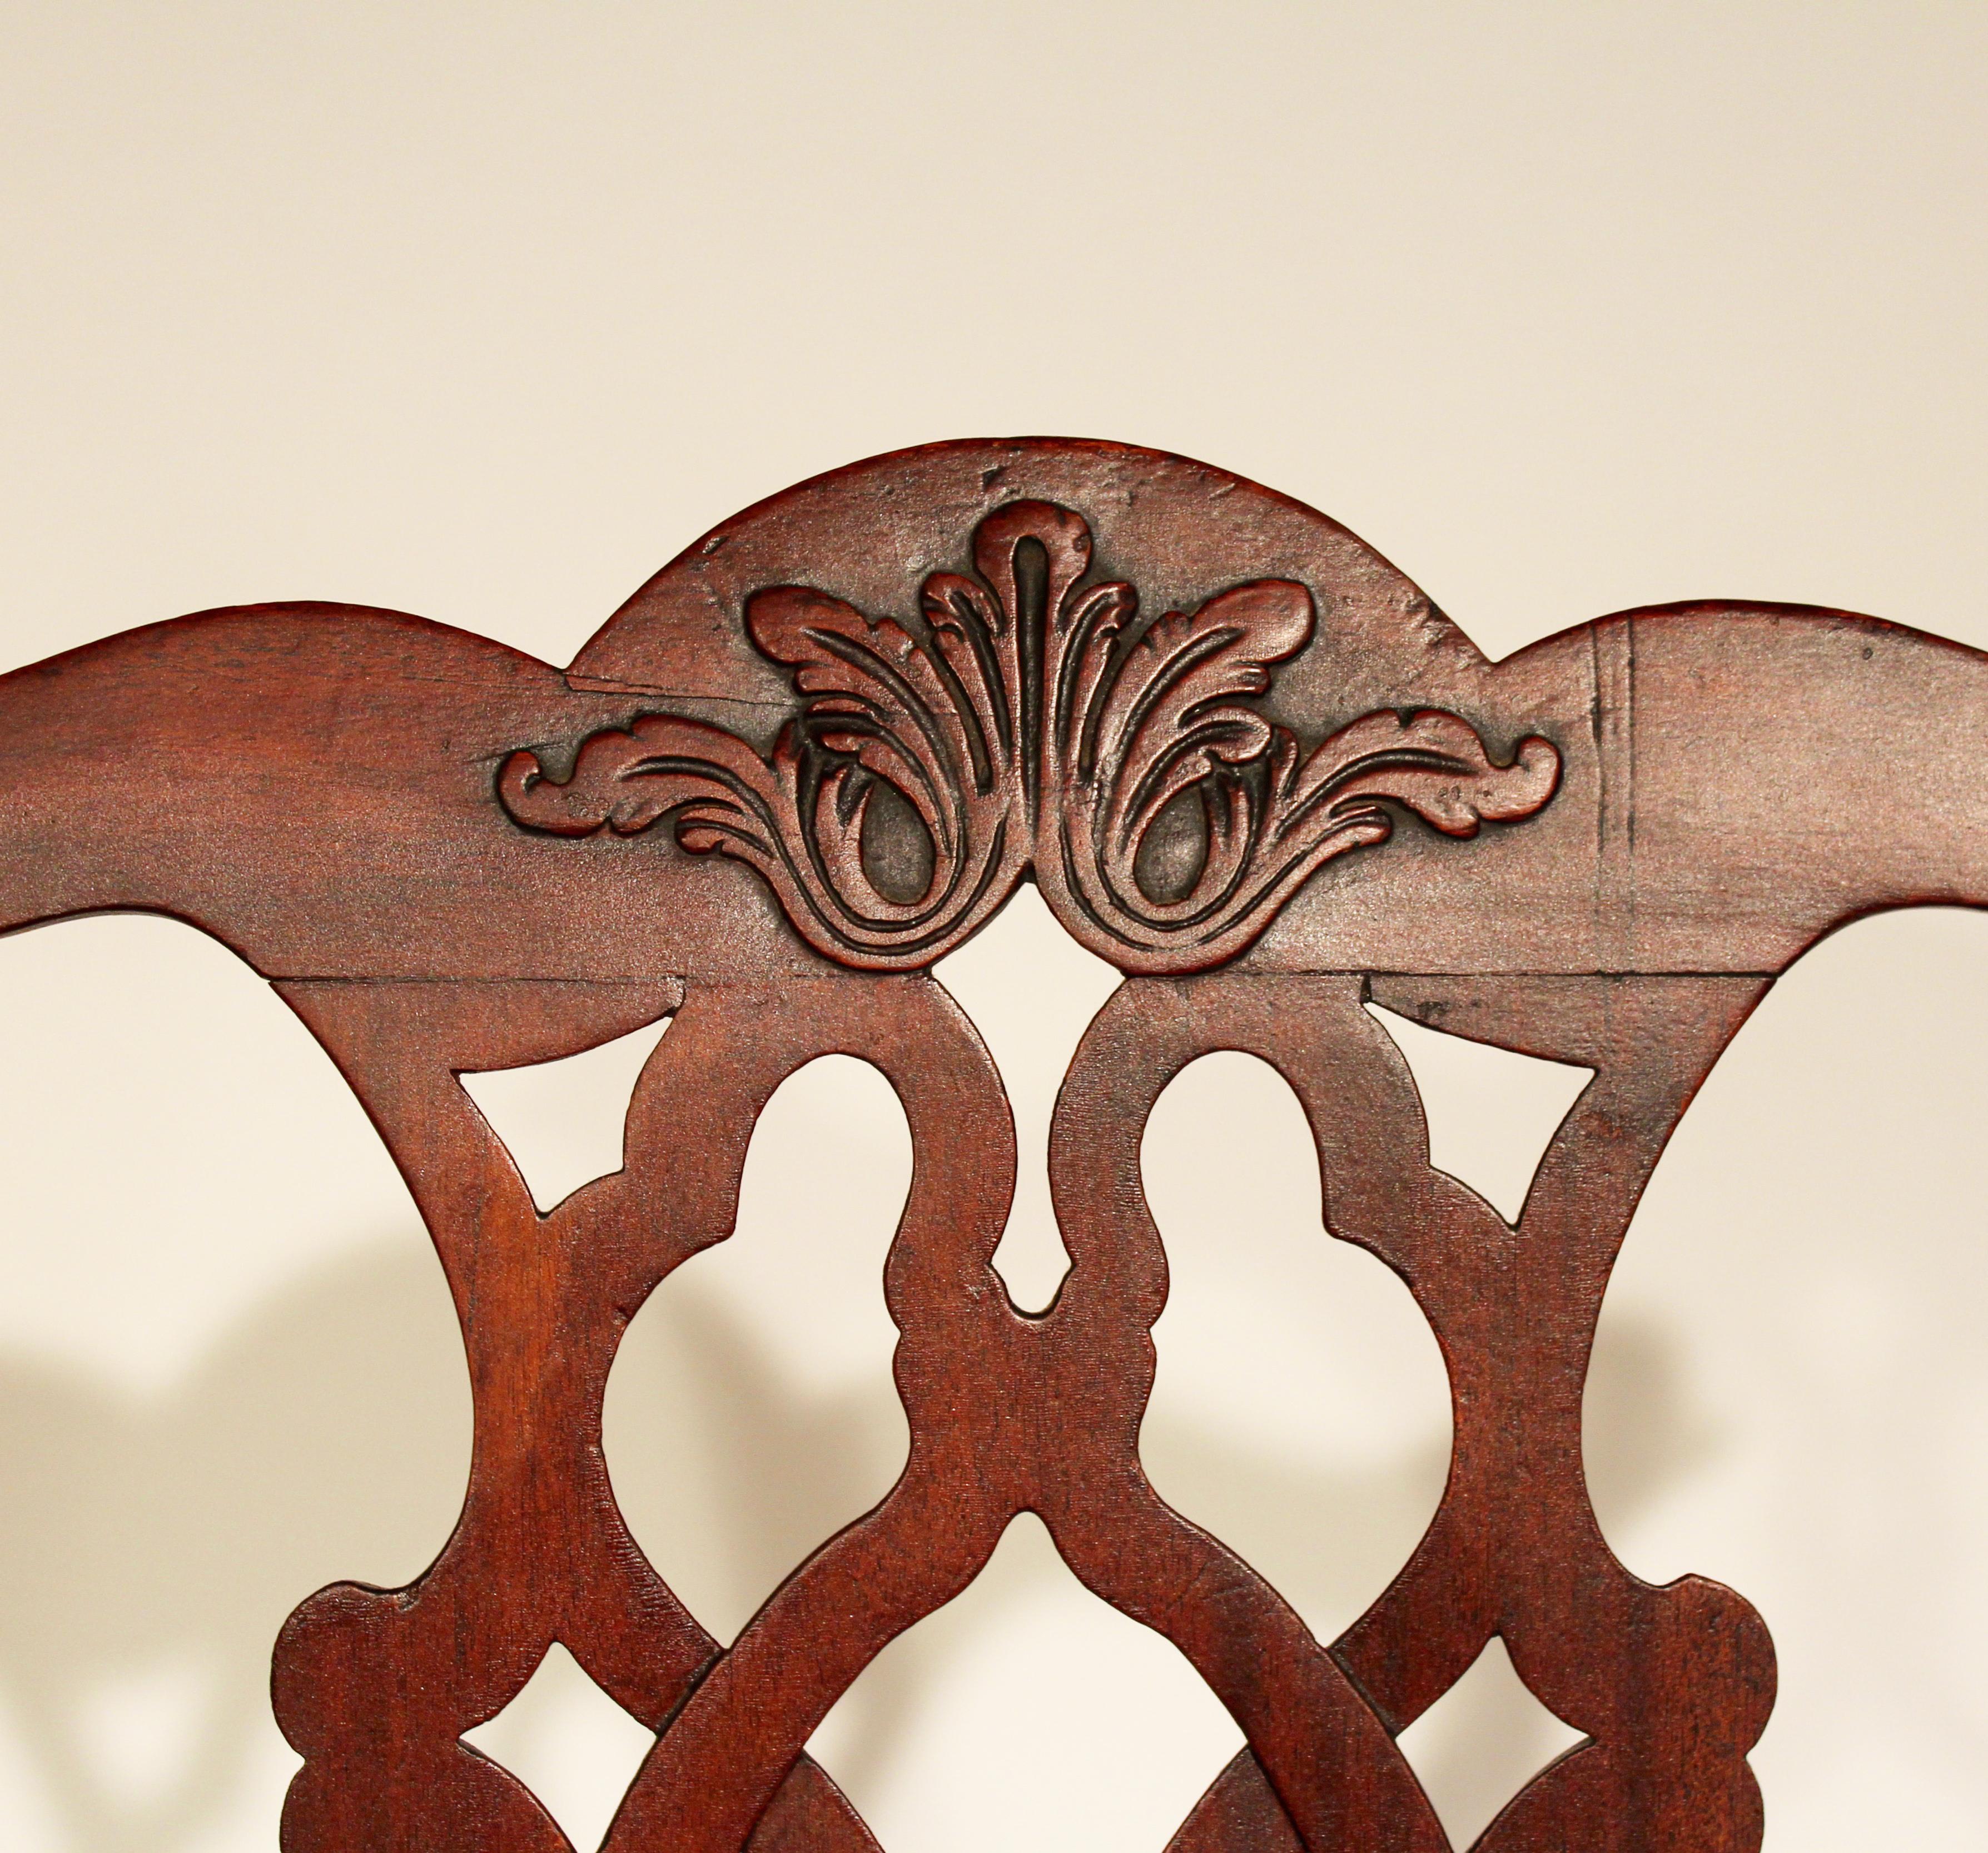 Pair of 18th century Chippendale side chairs possibly made in Maryland with a relief carved crest rail a Gothic carved splat cabriole legs with shells on the knees and terminating in claw and ball feet.